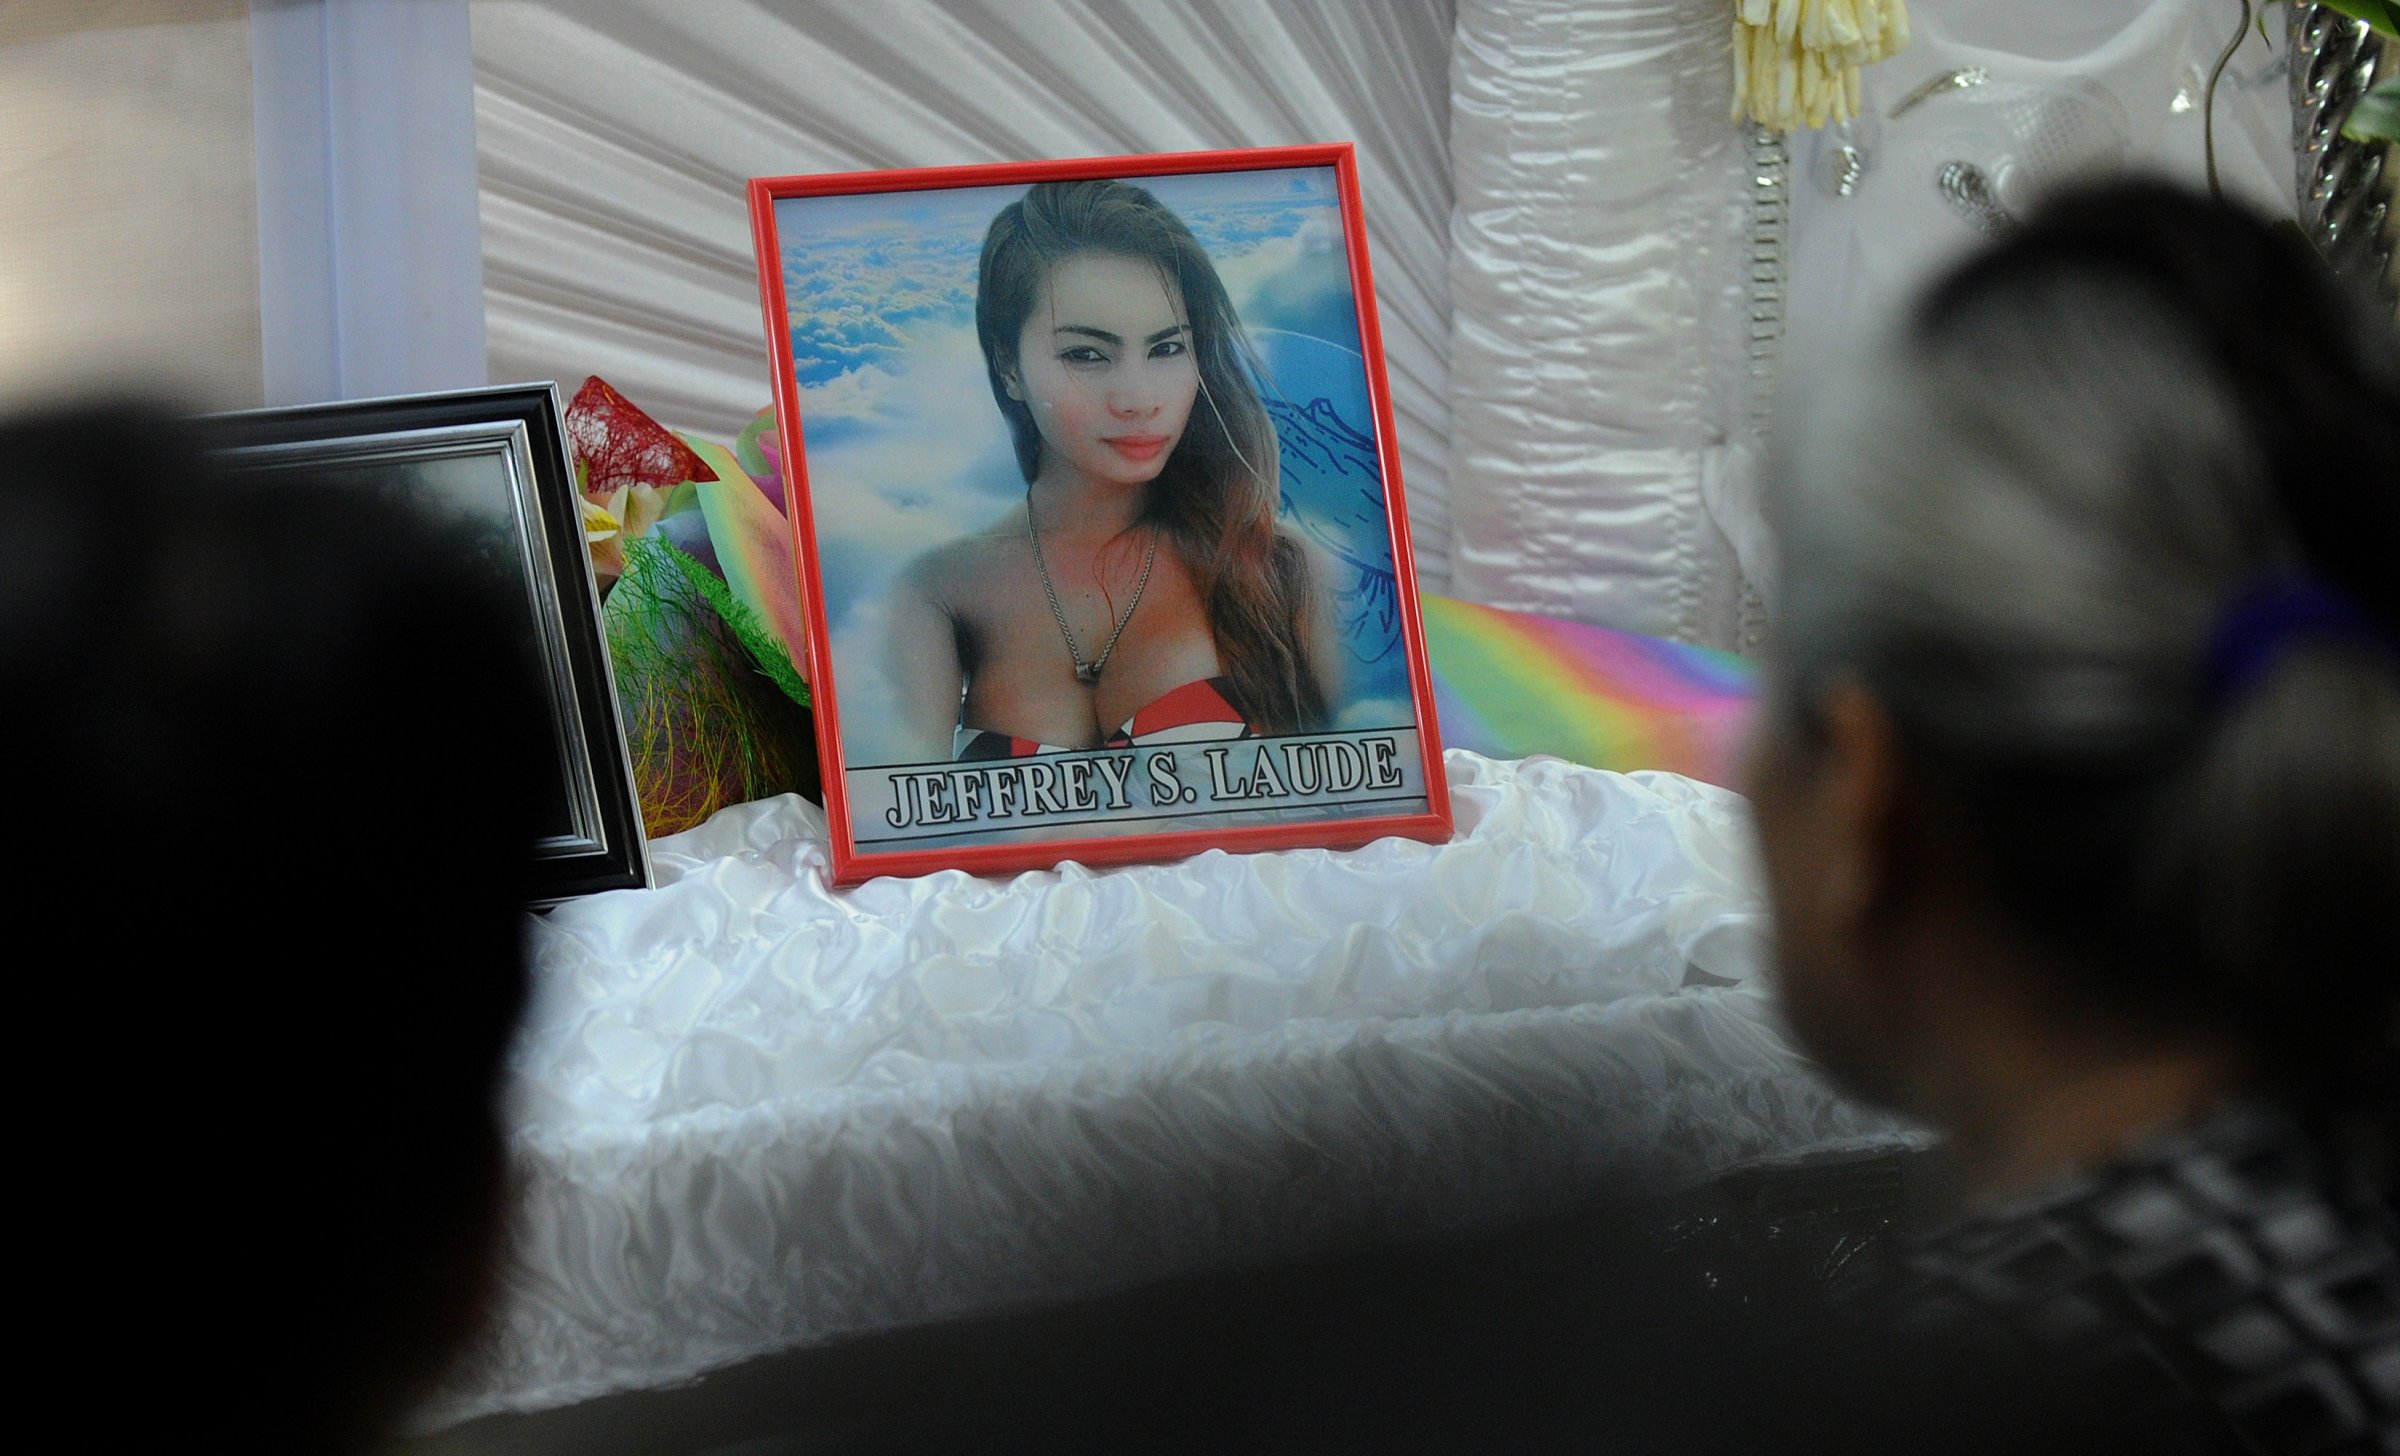 Friends and relatives of Filipino transgender resident Jeffrey Laude look on alongside his coffin and photograph in the northern Philippine city of Olongapo on Oct. 14, 2014.